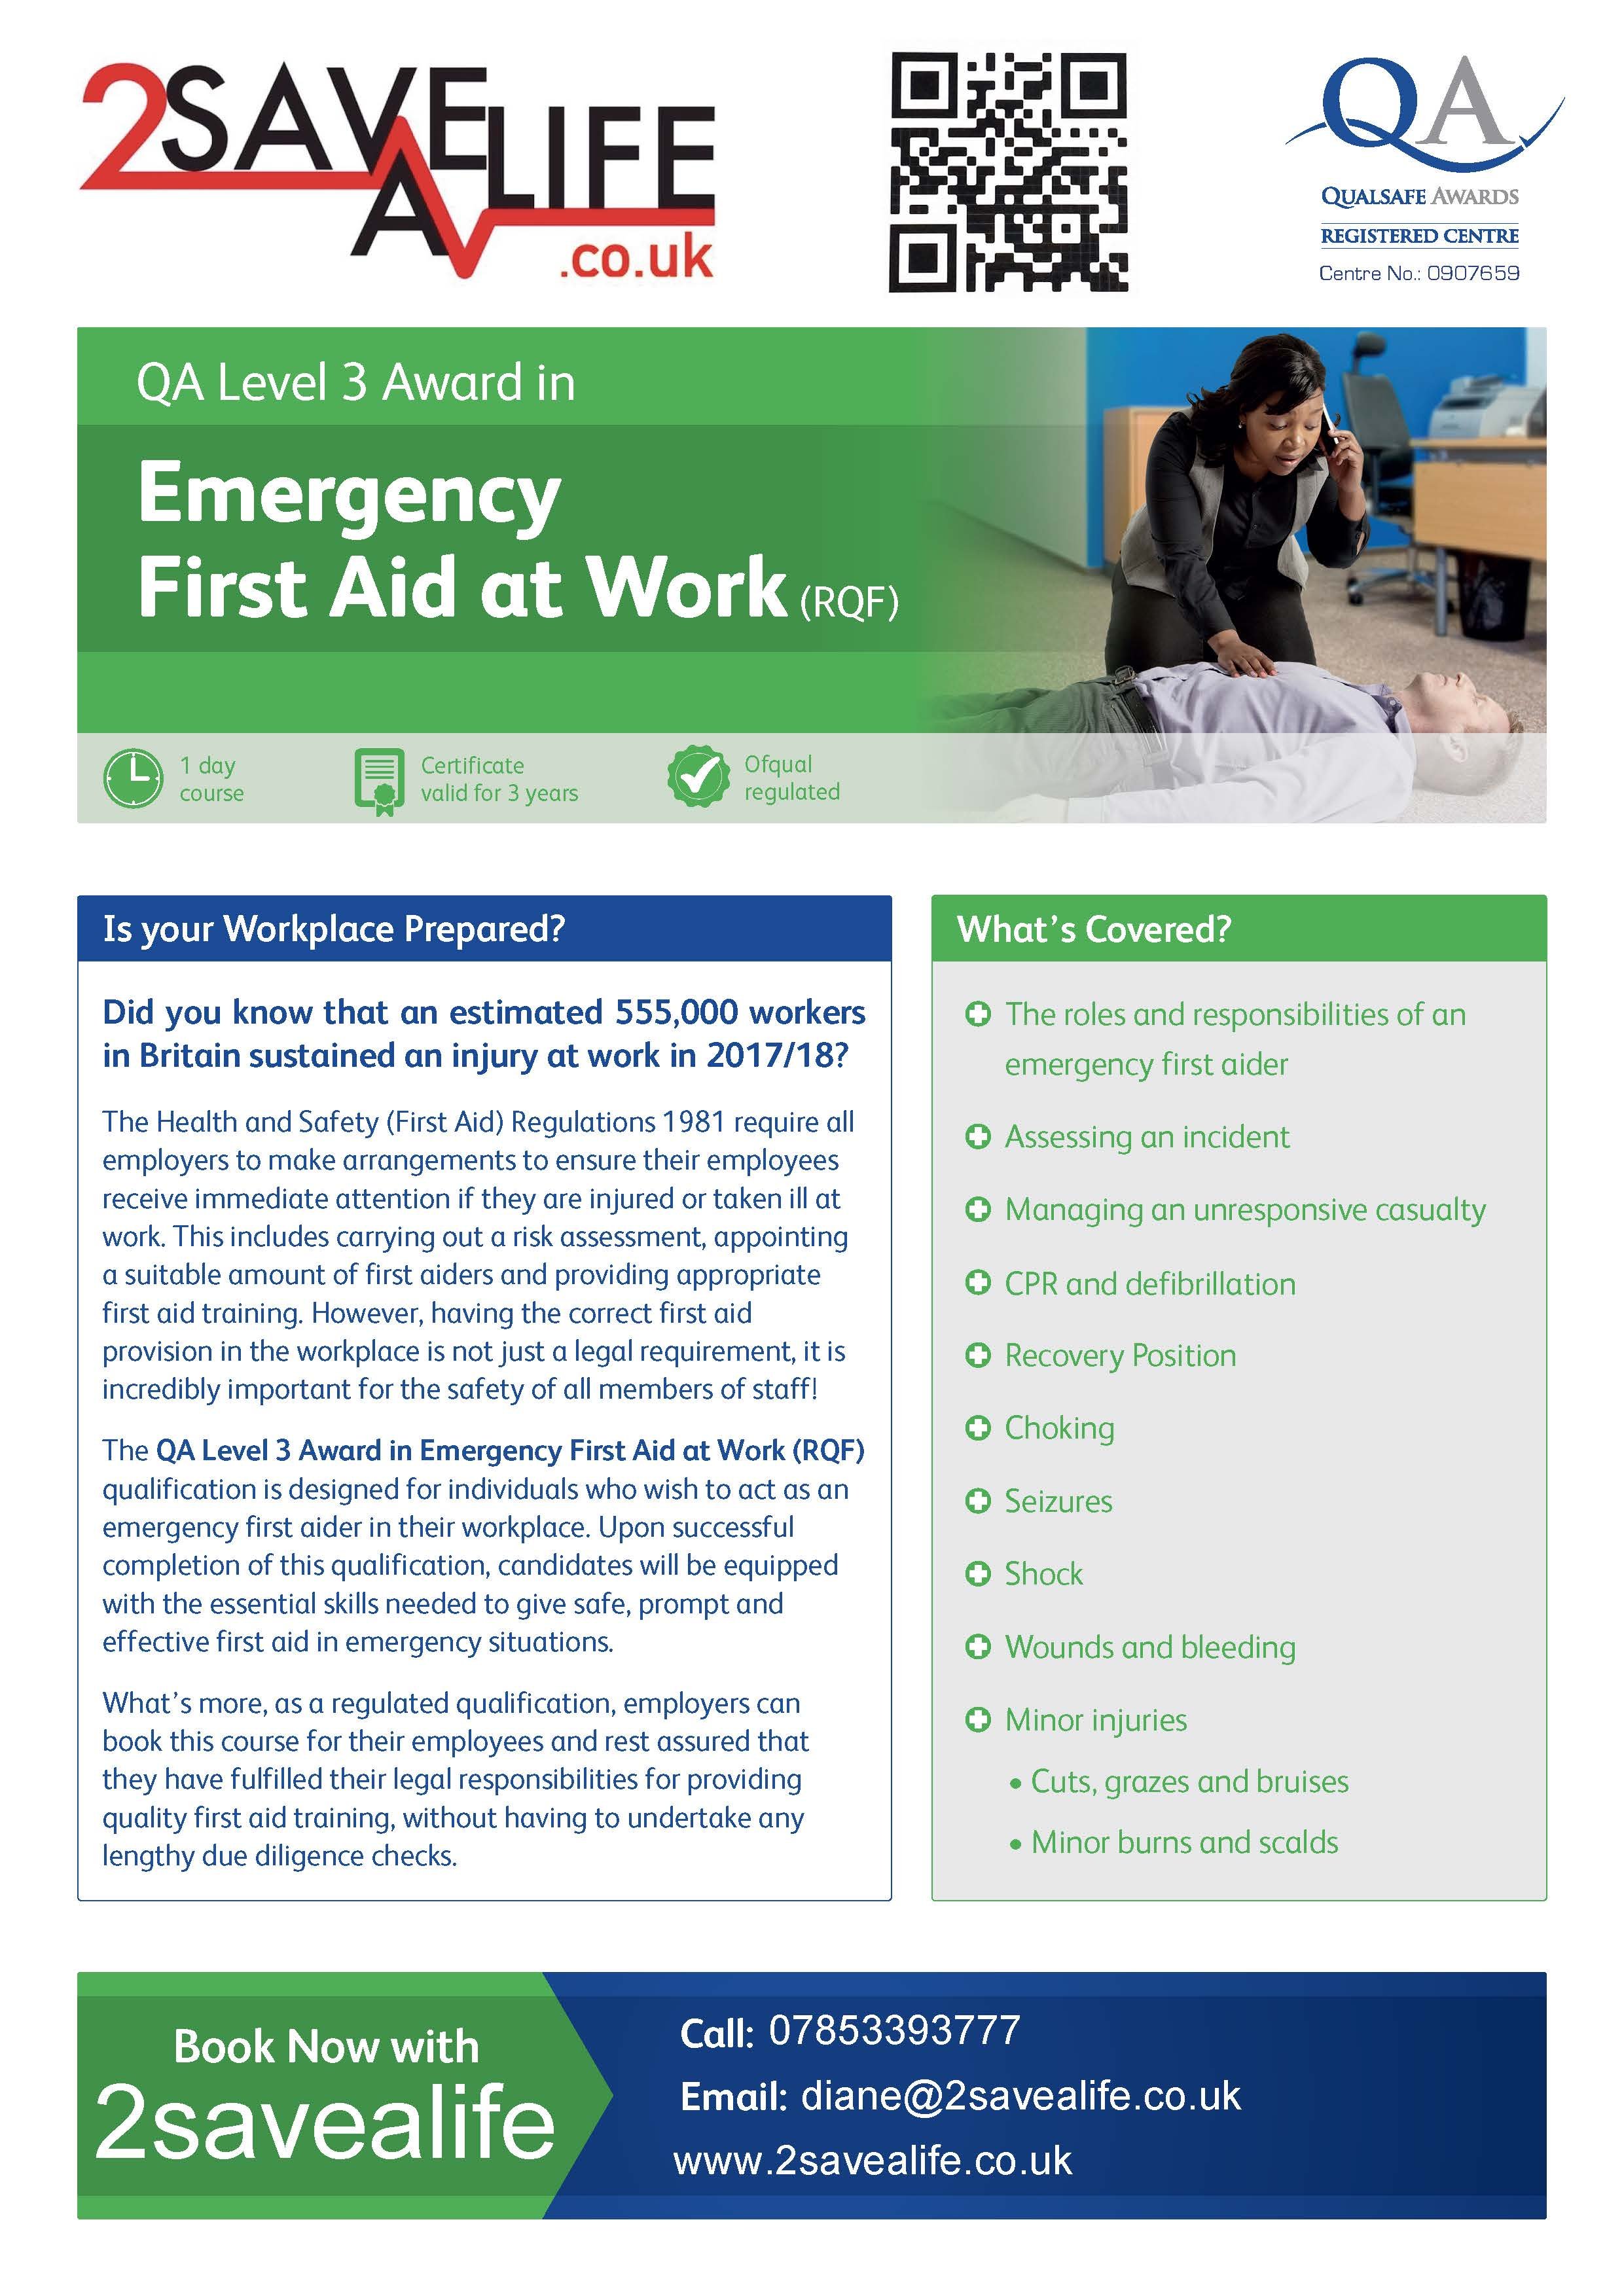 Emergency First Aid at Work - 'open' course